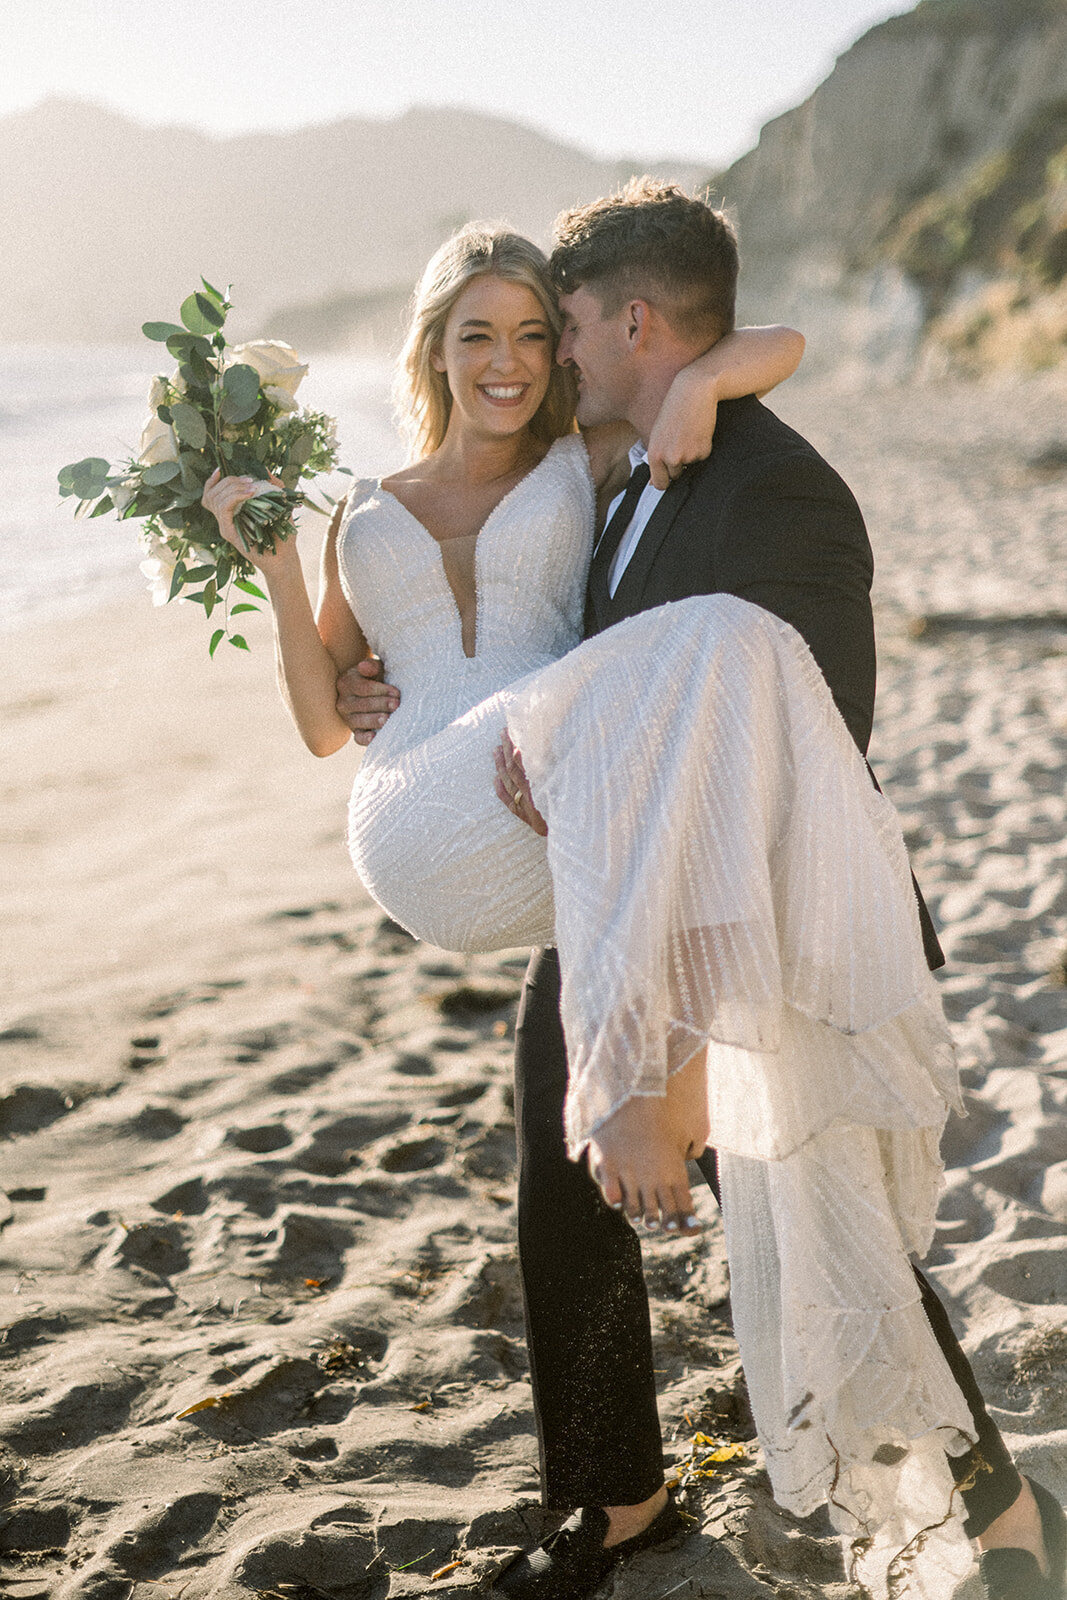 Groom carrying bride on the beach at Dolphin Bay Resort wedding in Pismo Beach, CA